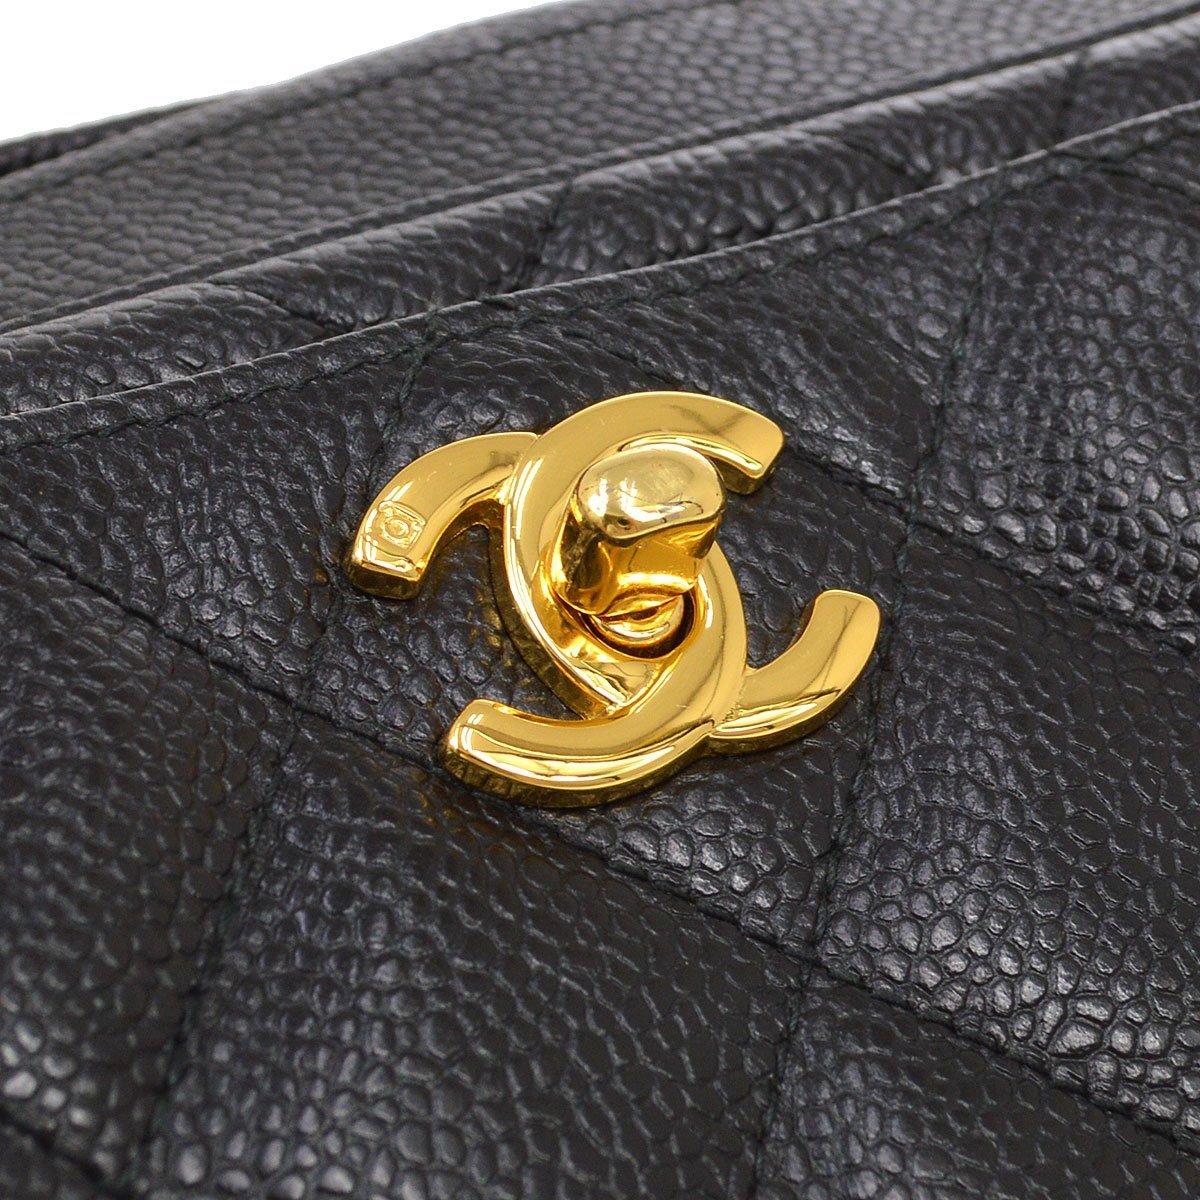 Pre-Owned Vintage Condition
From 1996 Collection
Caviar Leather
Leather Lining
Gold Tone Hardware
Measures 10.75